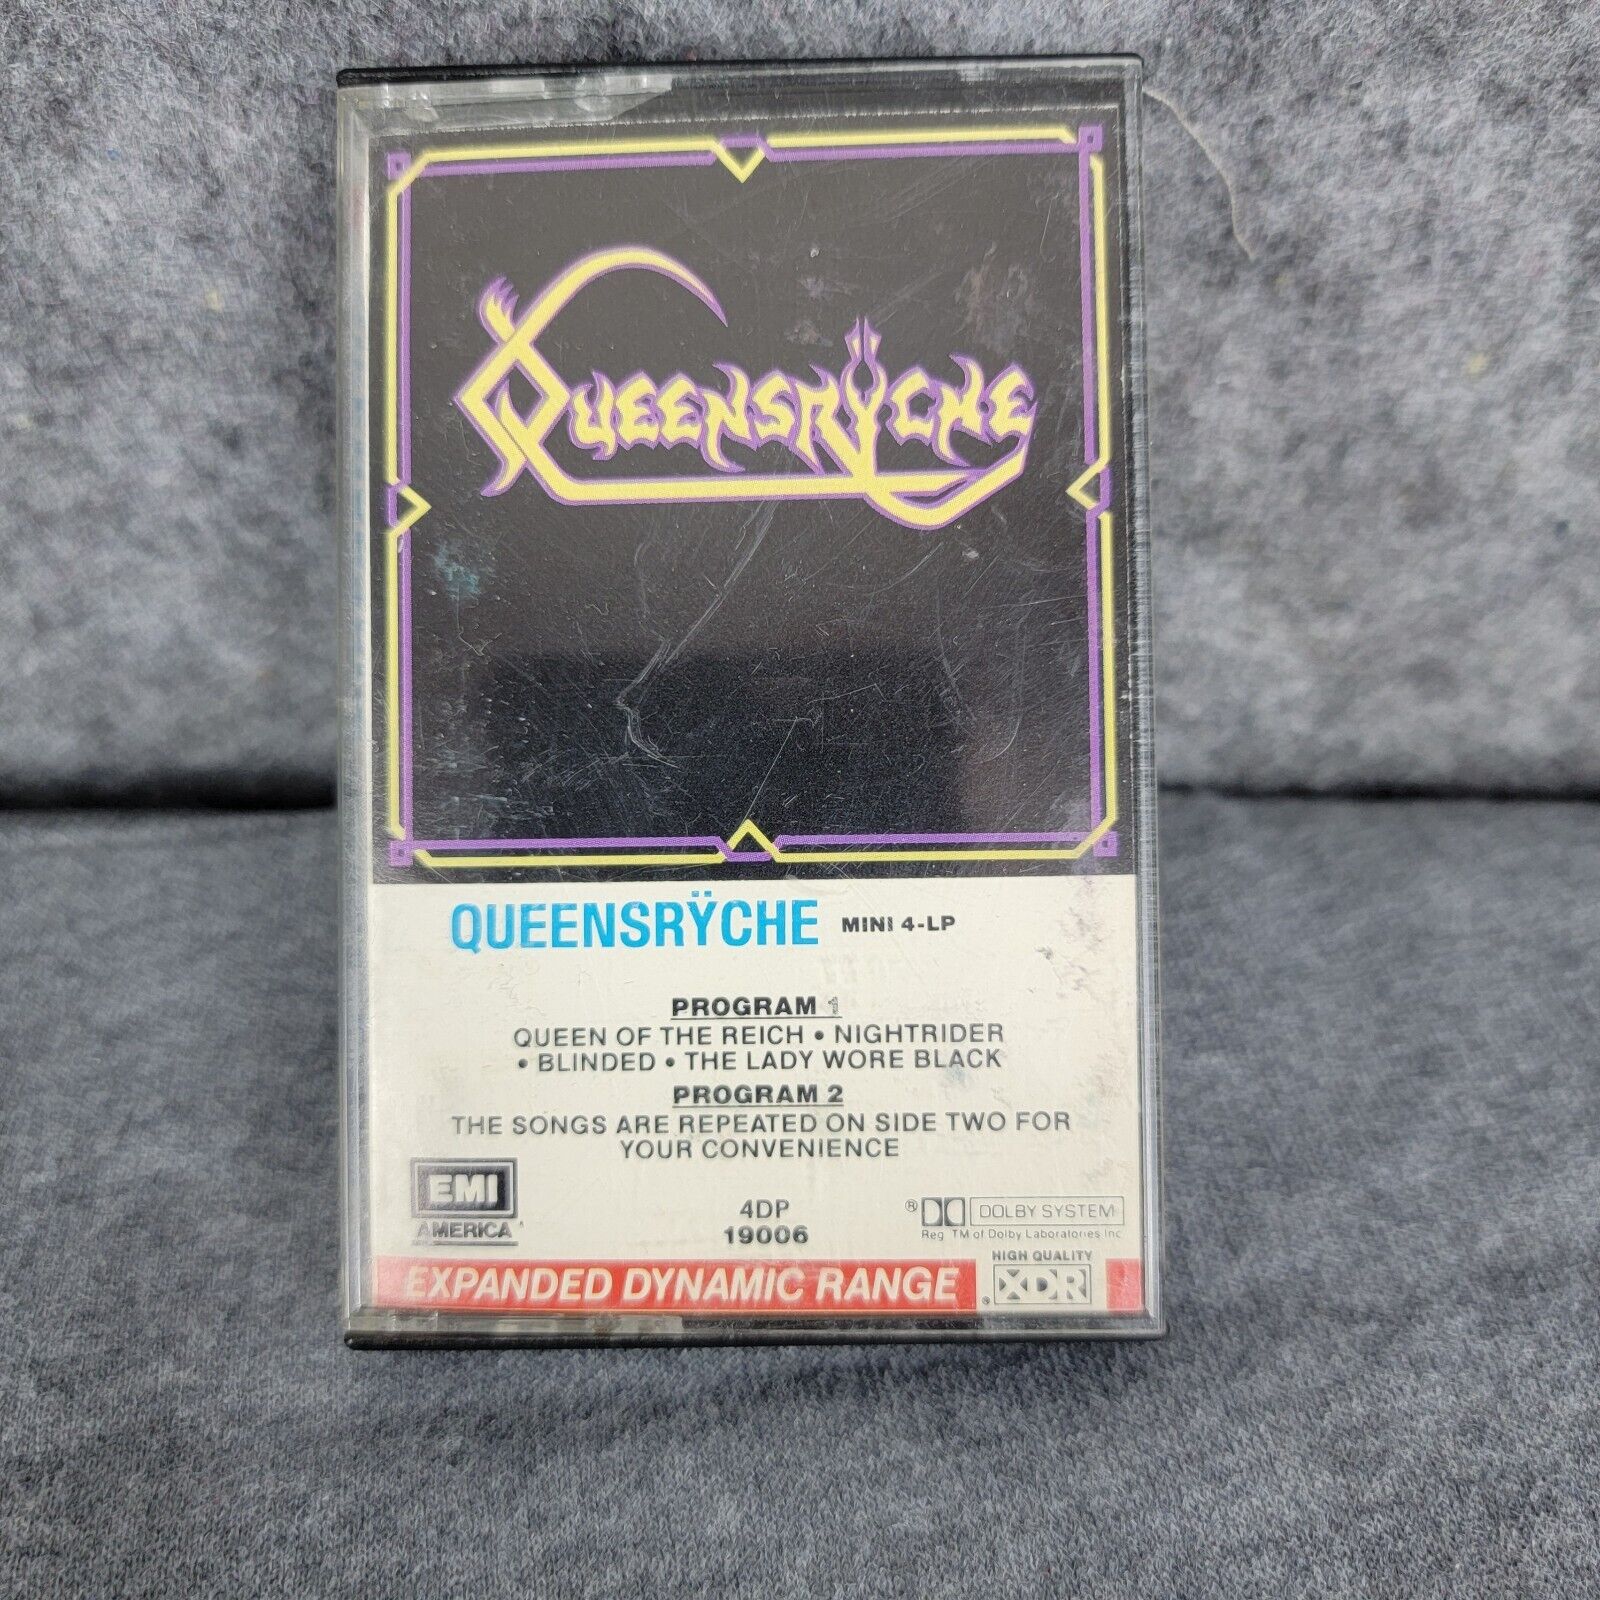 QUEENSRYCHE CASSETTE TAPE Mini 4 LP XDR EMI Straight out of the 80s